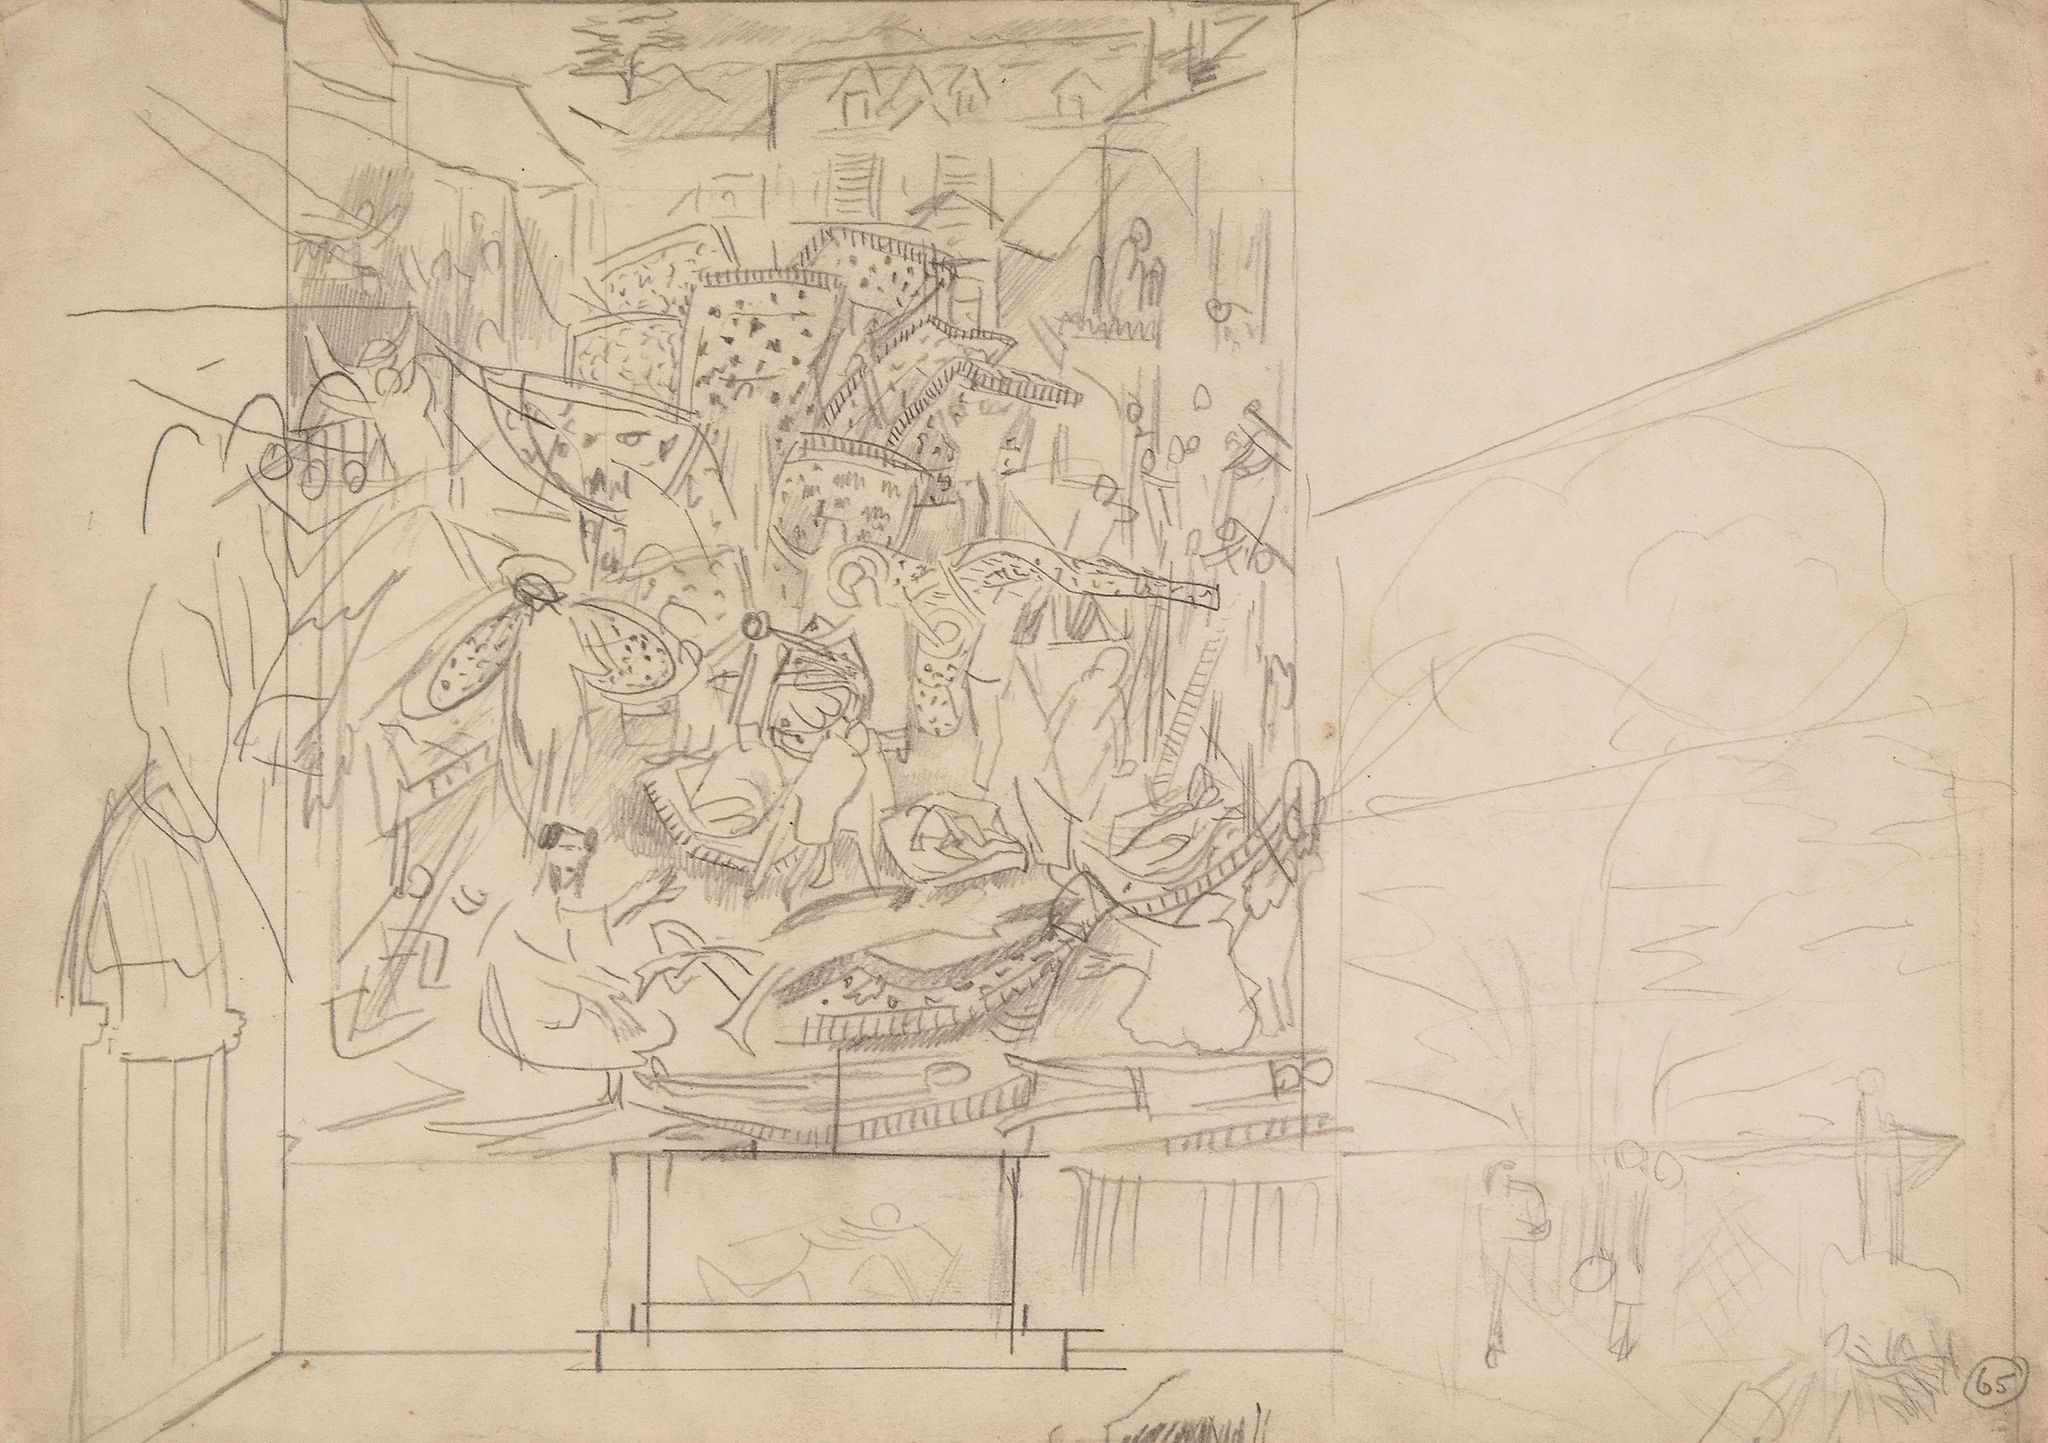 Stanley Spencer (1891-1959) - Study, c1935 pencil on paper 10 x 14 in., 25.4 x 35.6 cm IMPORTANT: